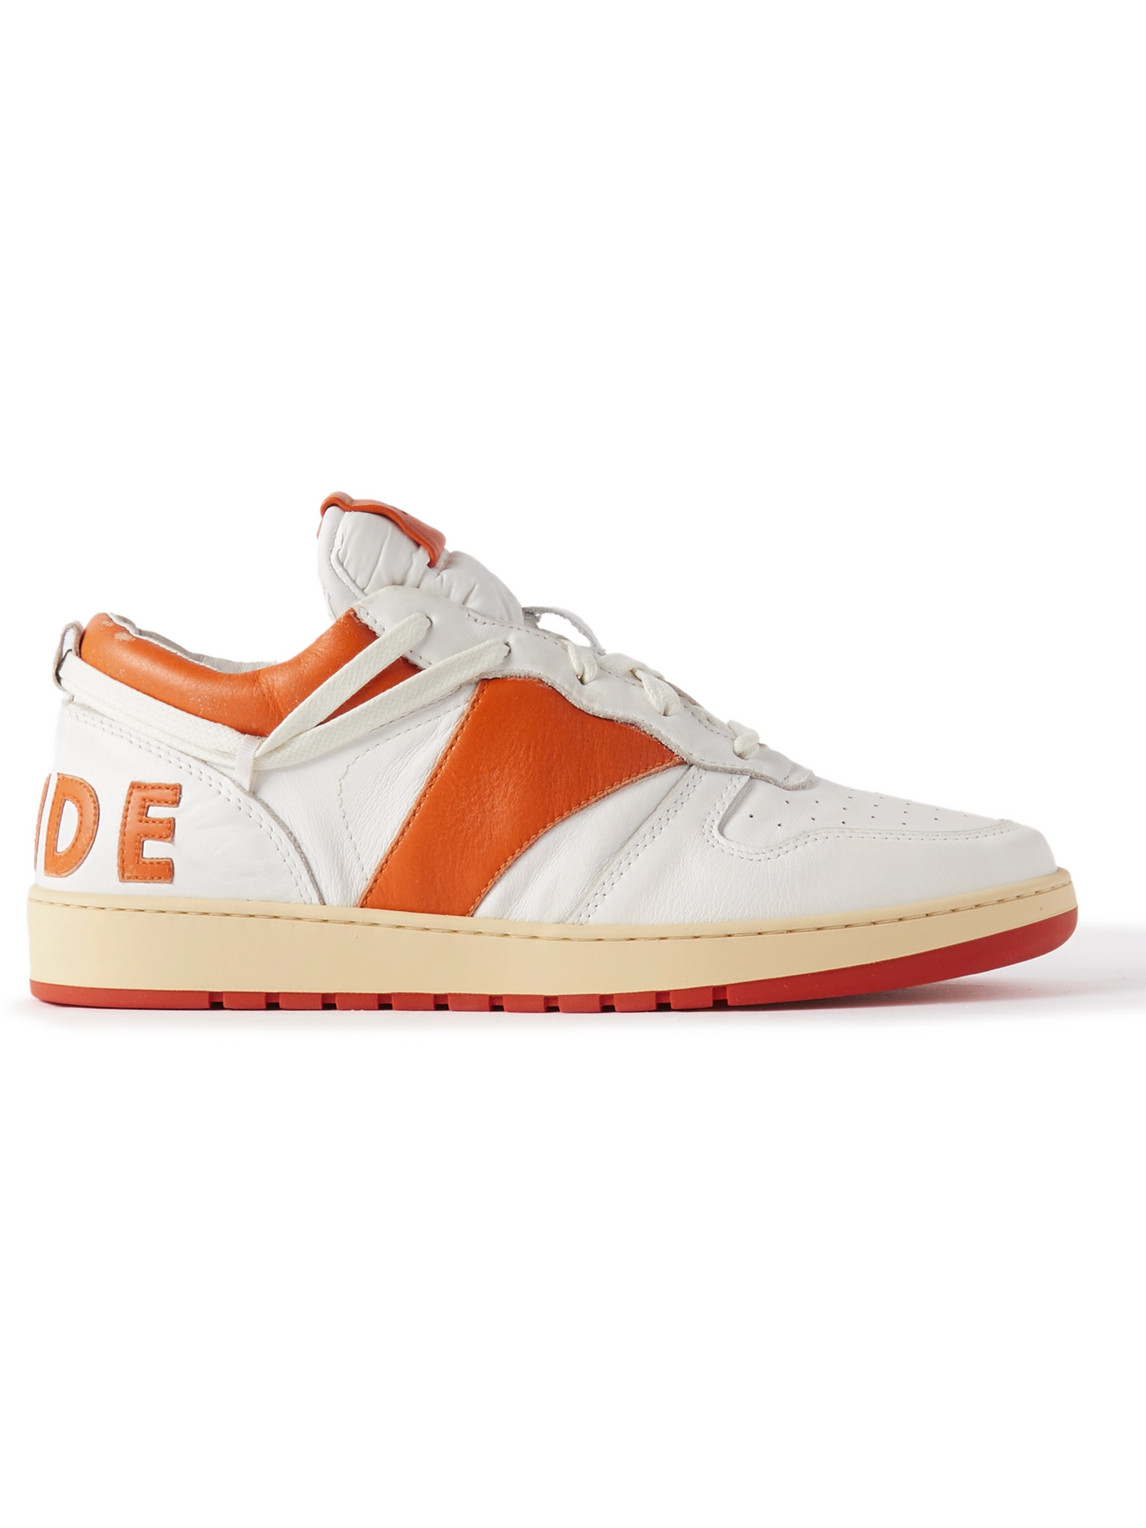 RHUDE RHECESS COLOUR-BLOCK DISTRESSED LEATHER SNEAKERS